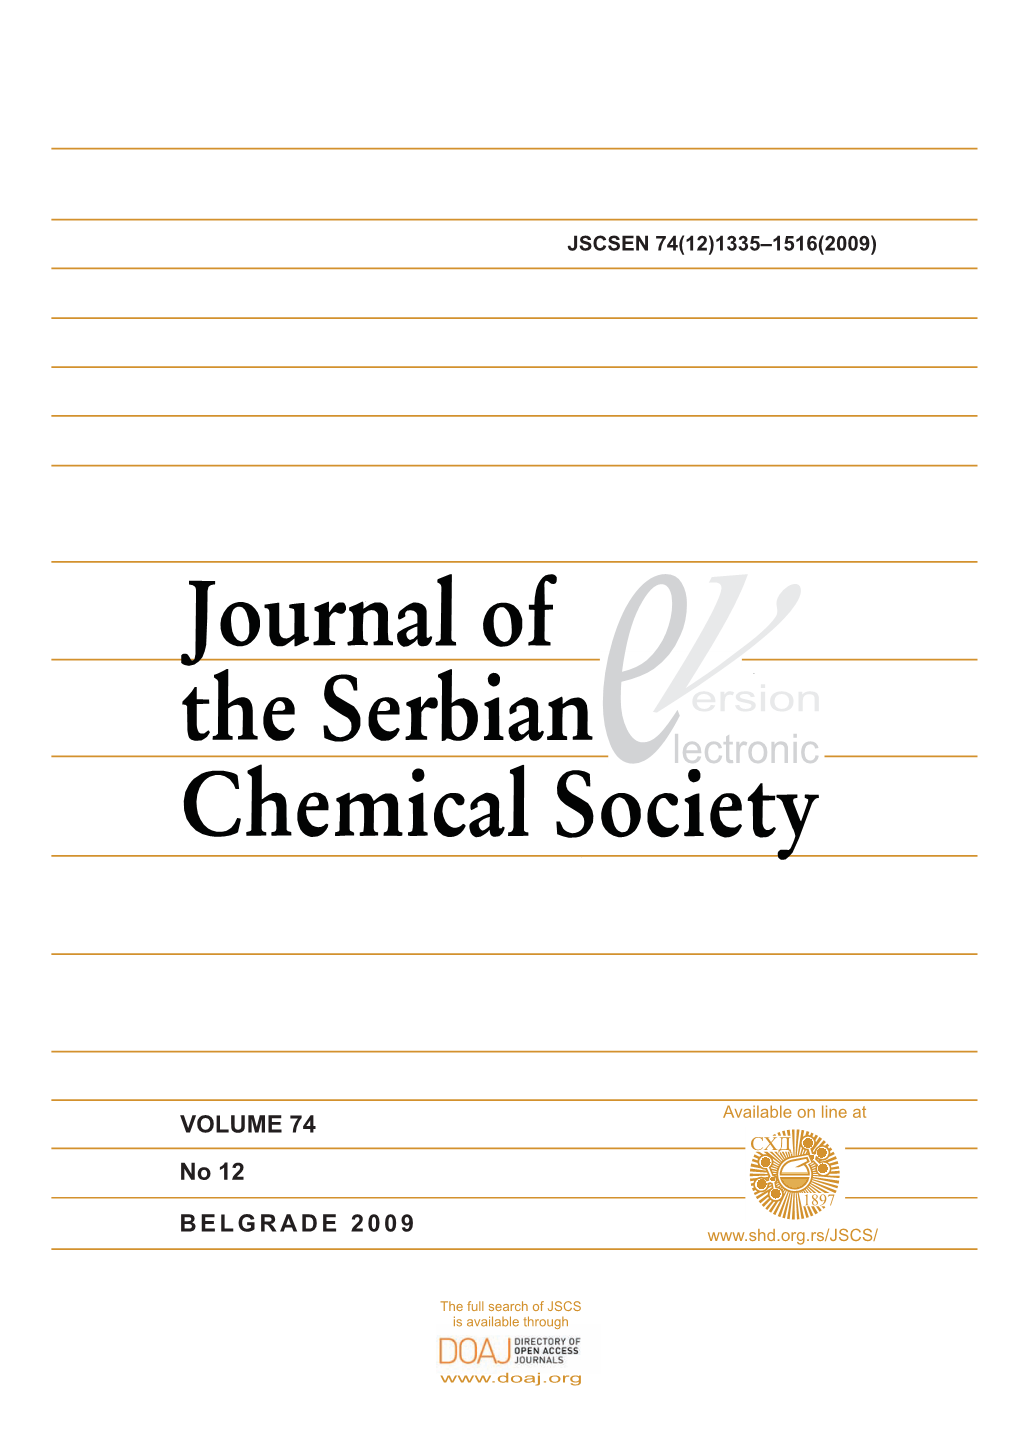 Journal of the Serbian Chemical Society, Vol. 74, 2009, No. 12